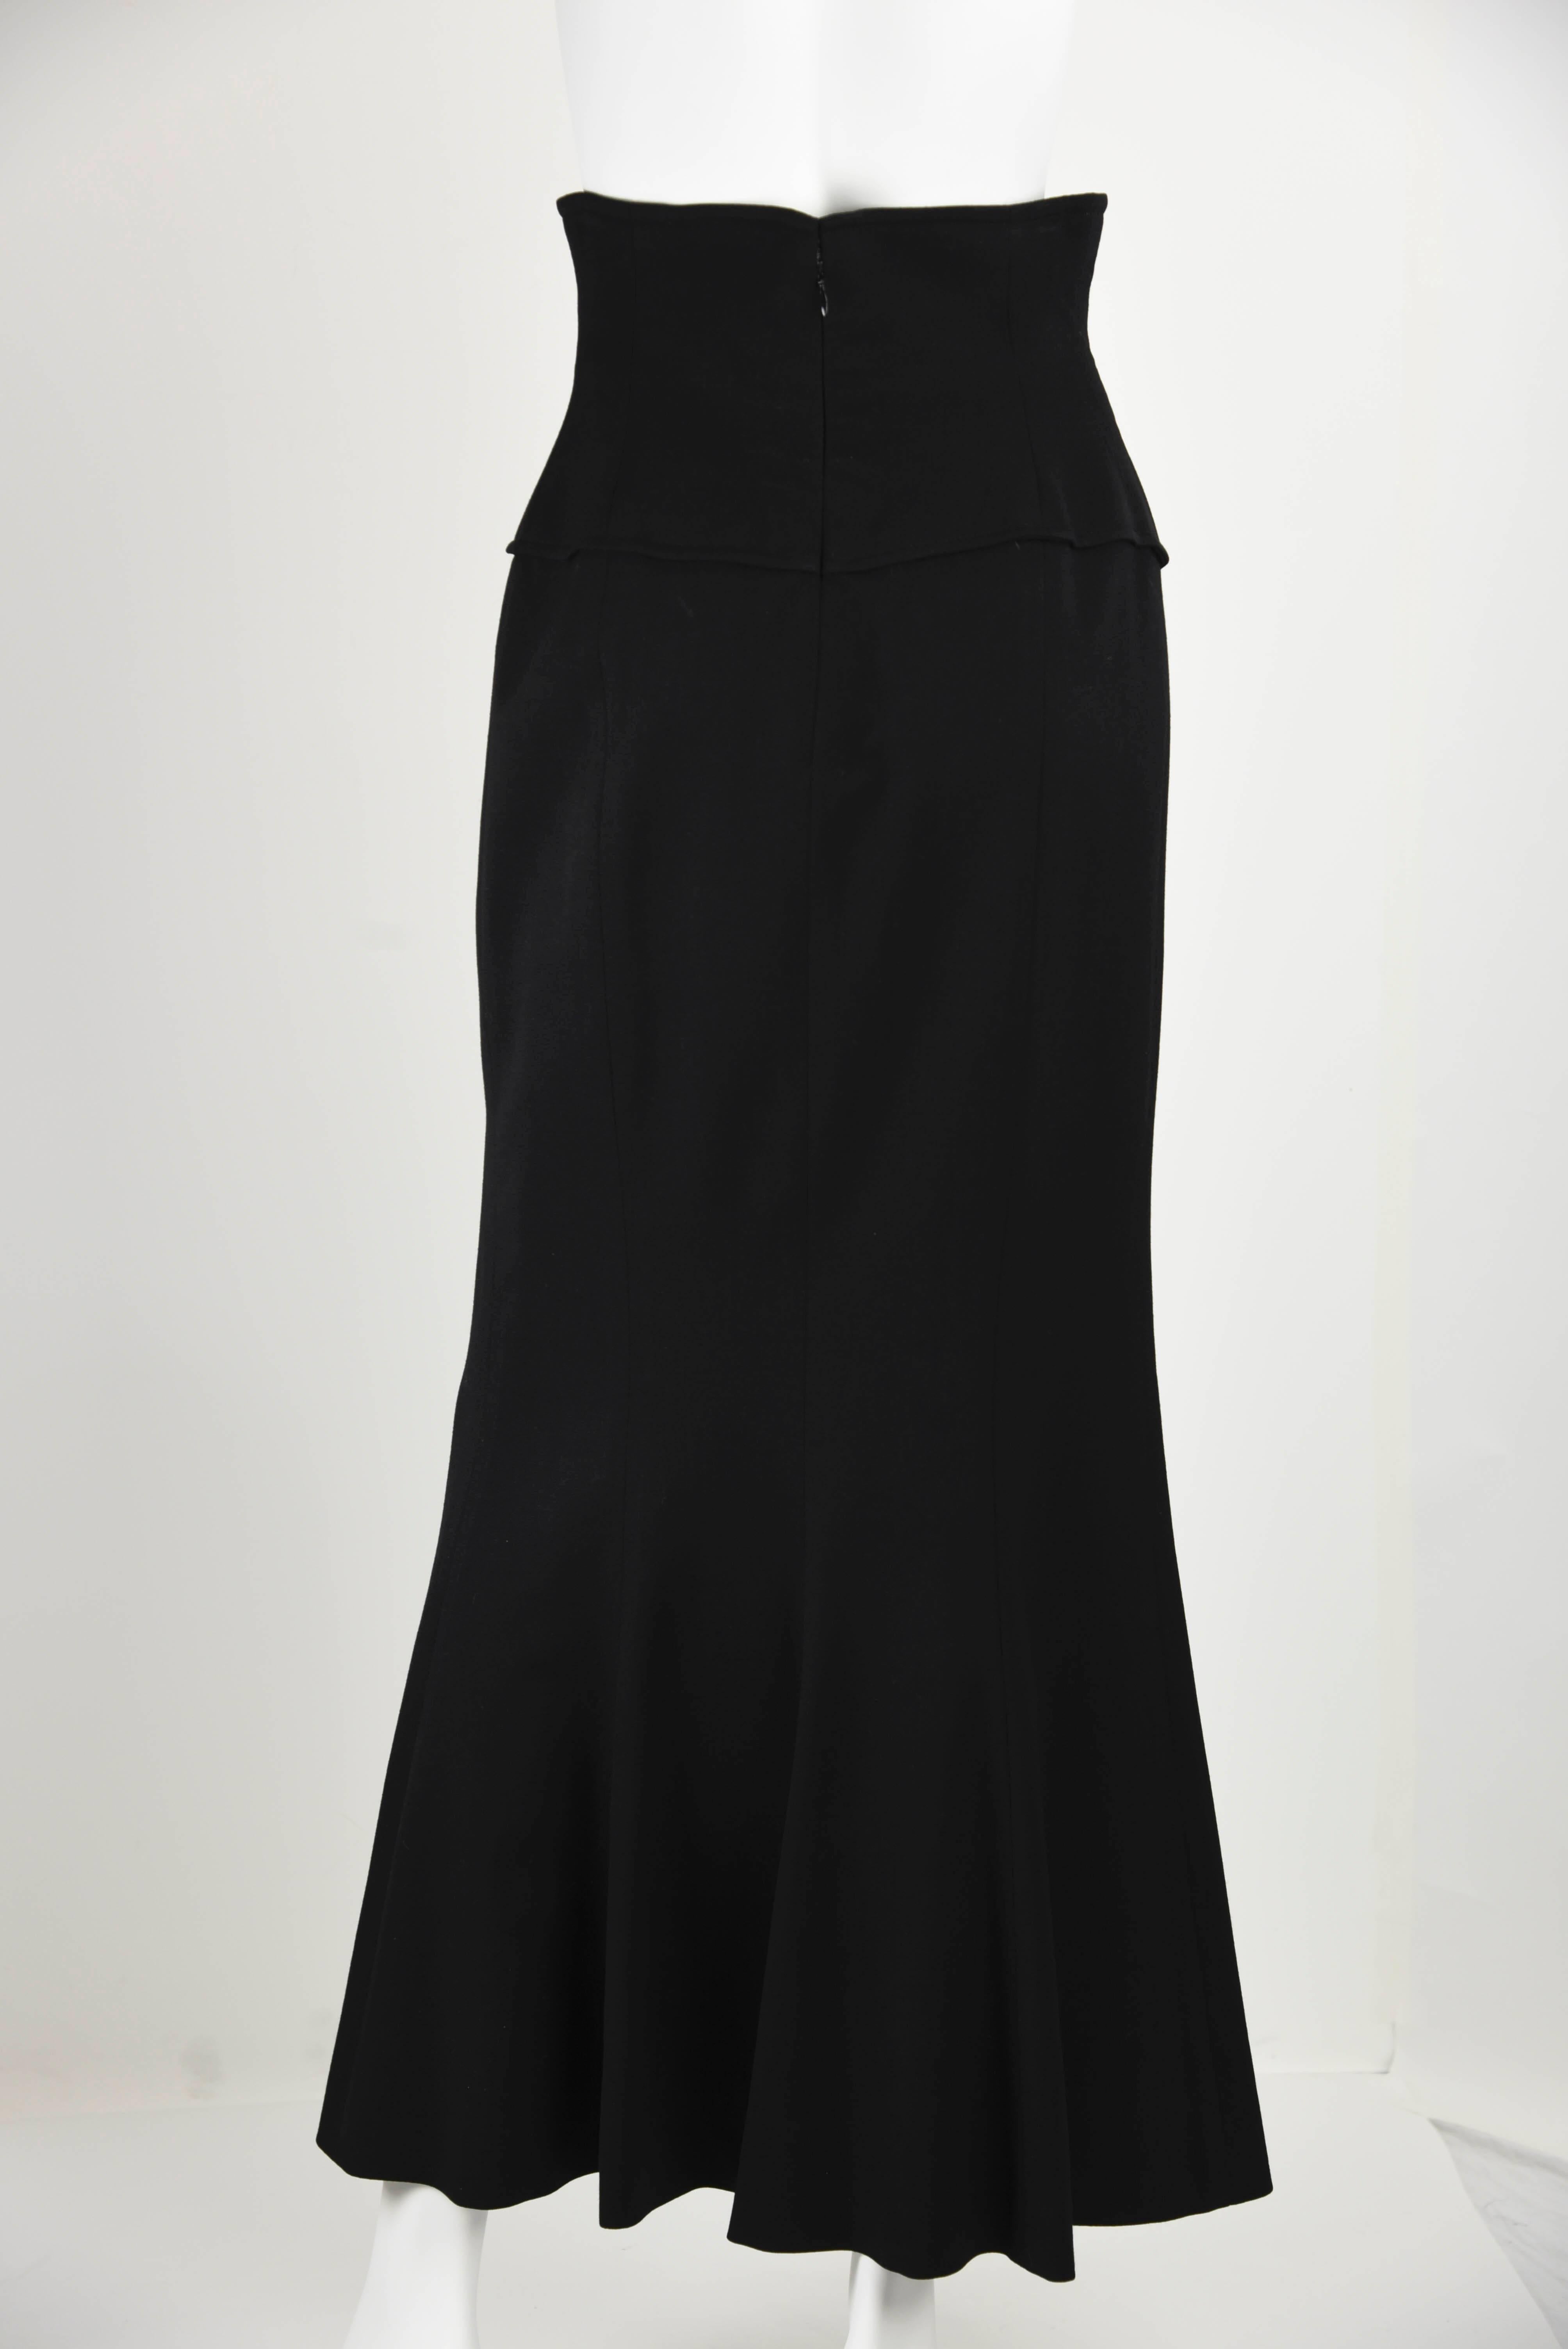 Chanel Boutique 1980's Long Black Skirt With Front Slits and Waist Detail FR 40 For Sale 1